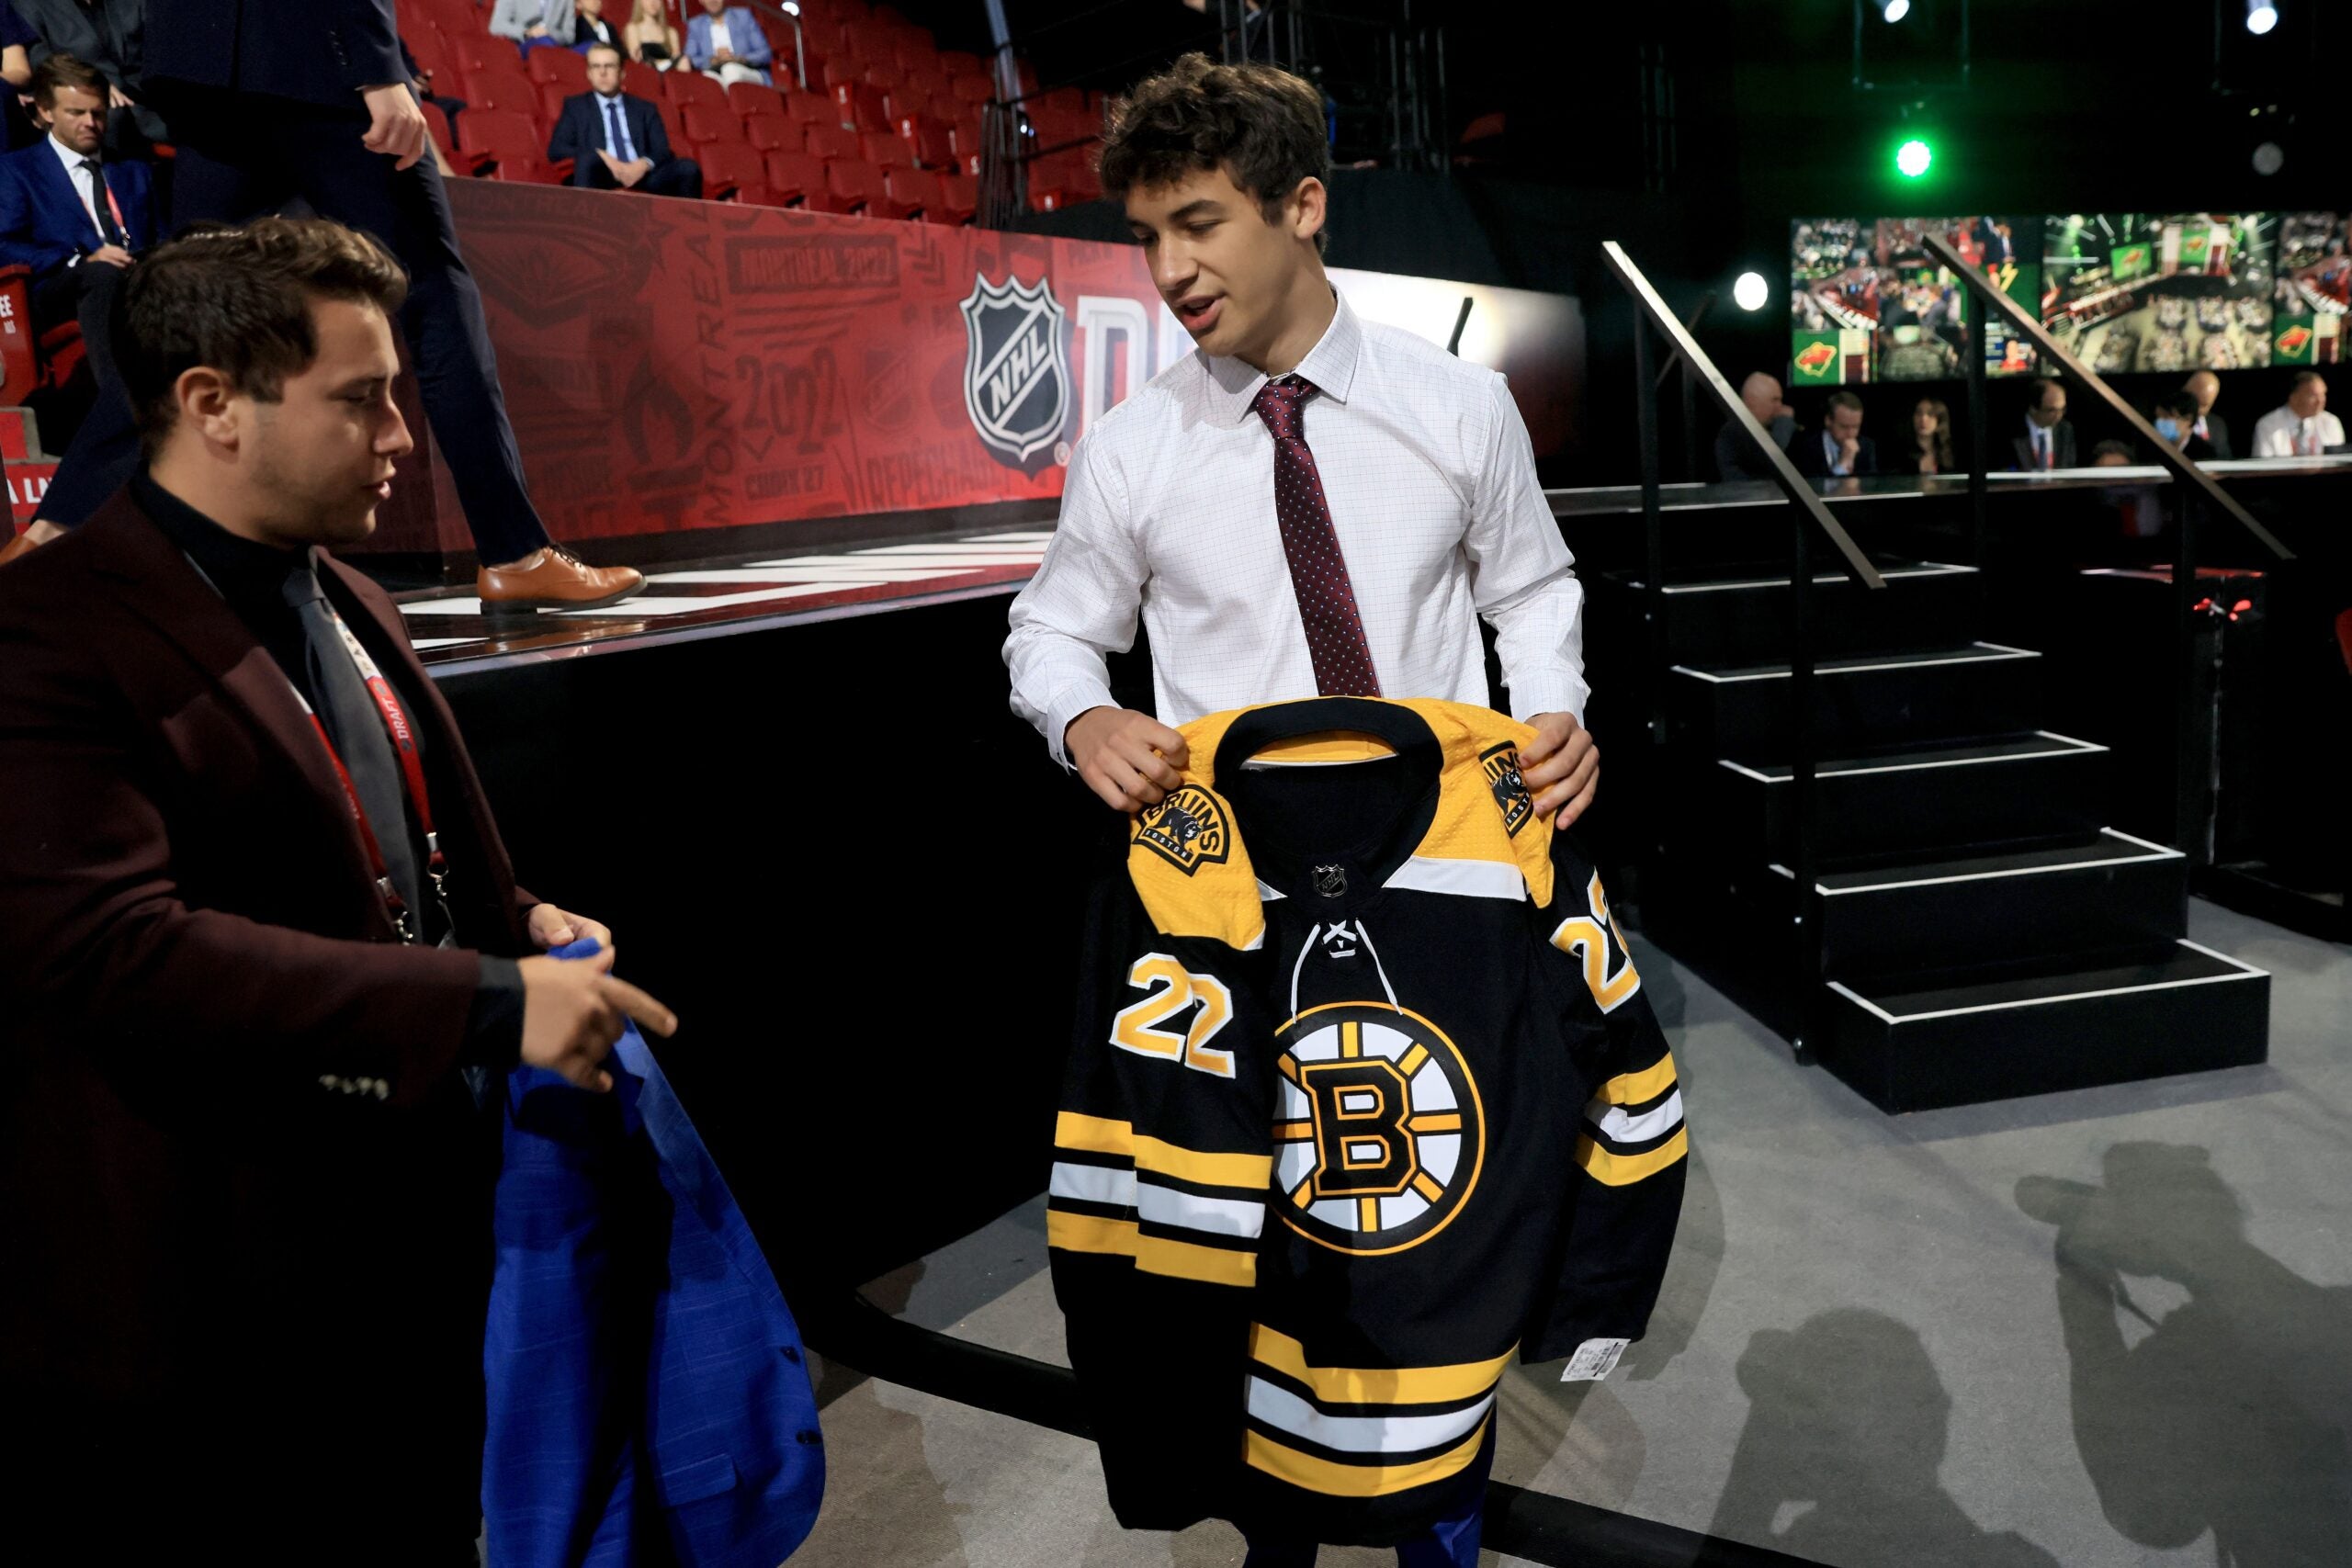 Here are the Bruins' picks in the 2022 NHL Draft